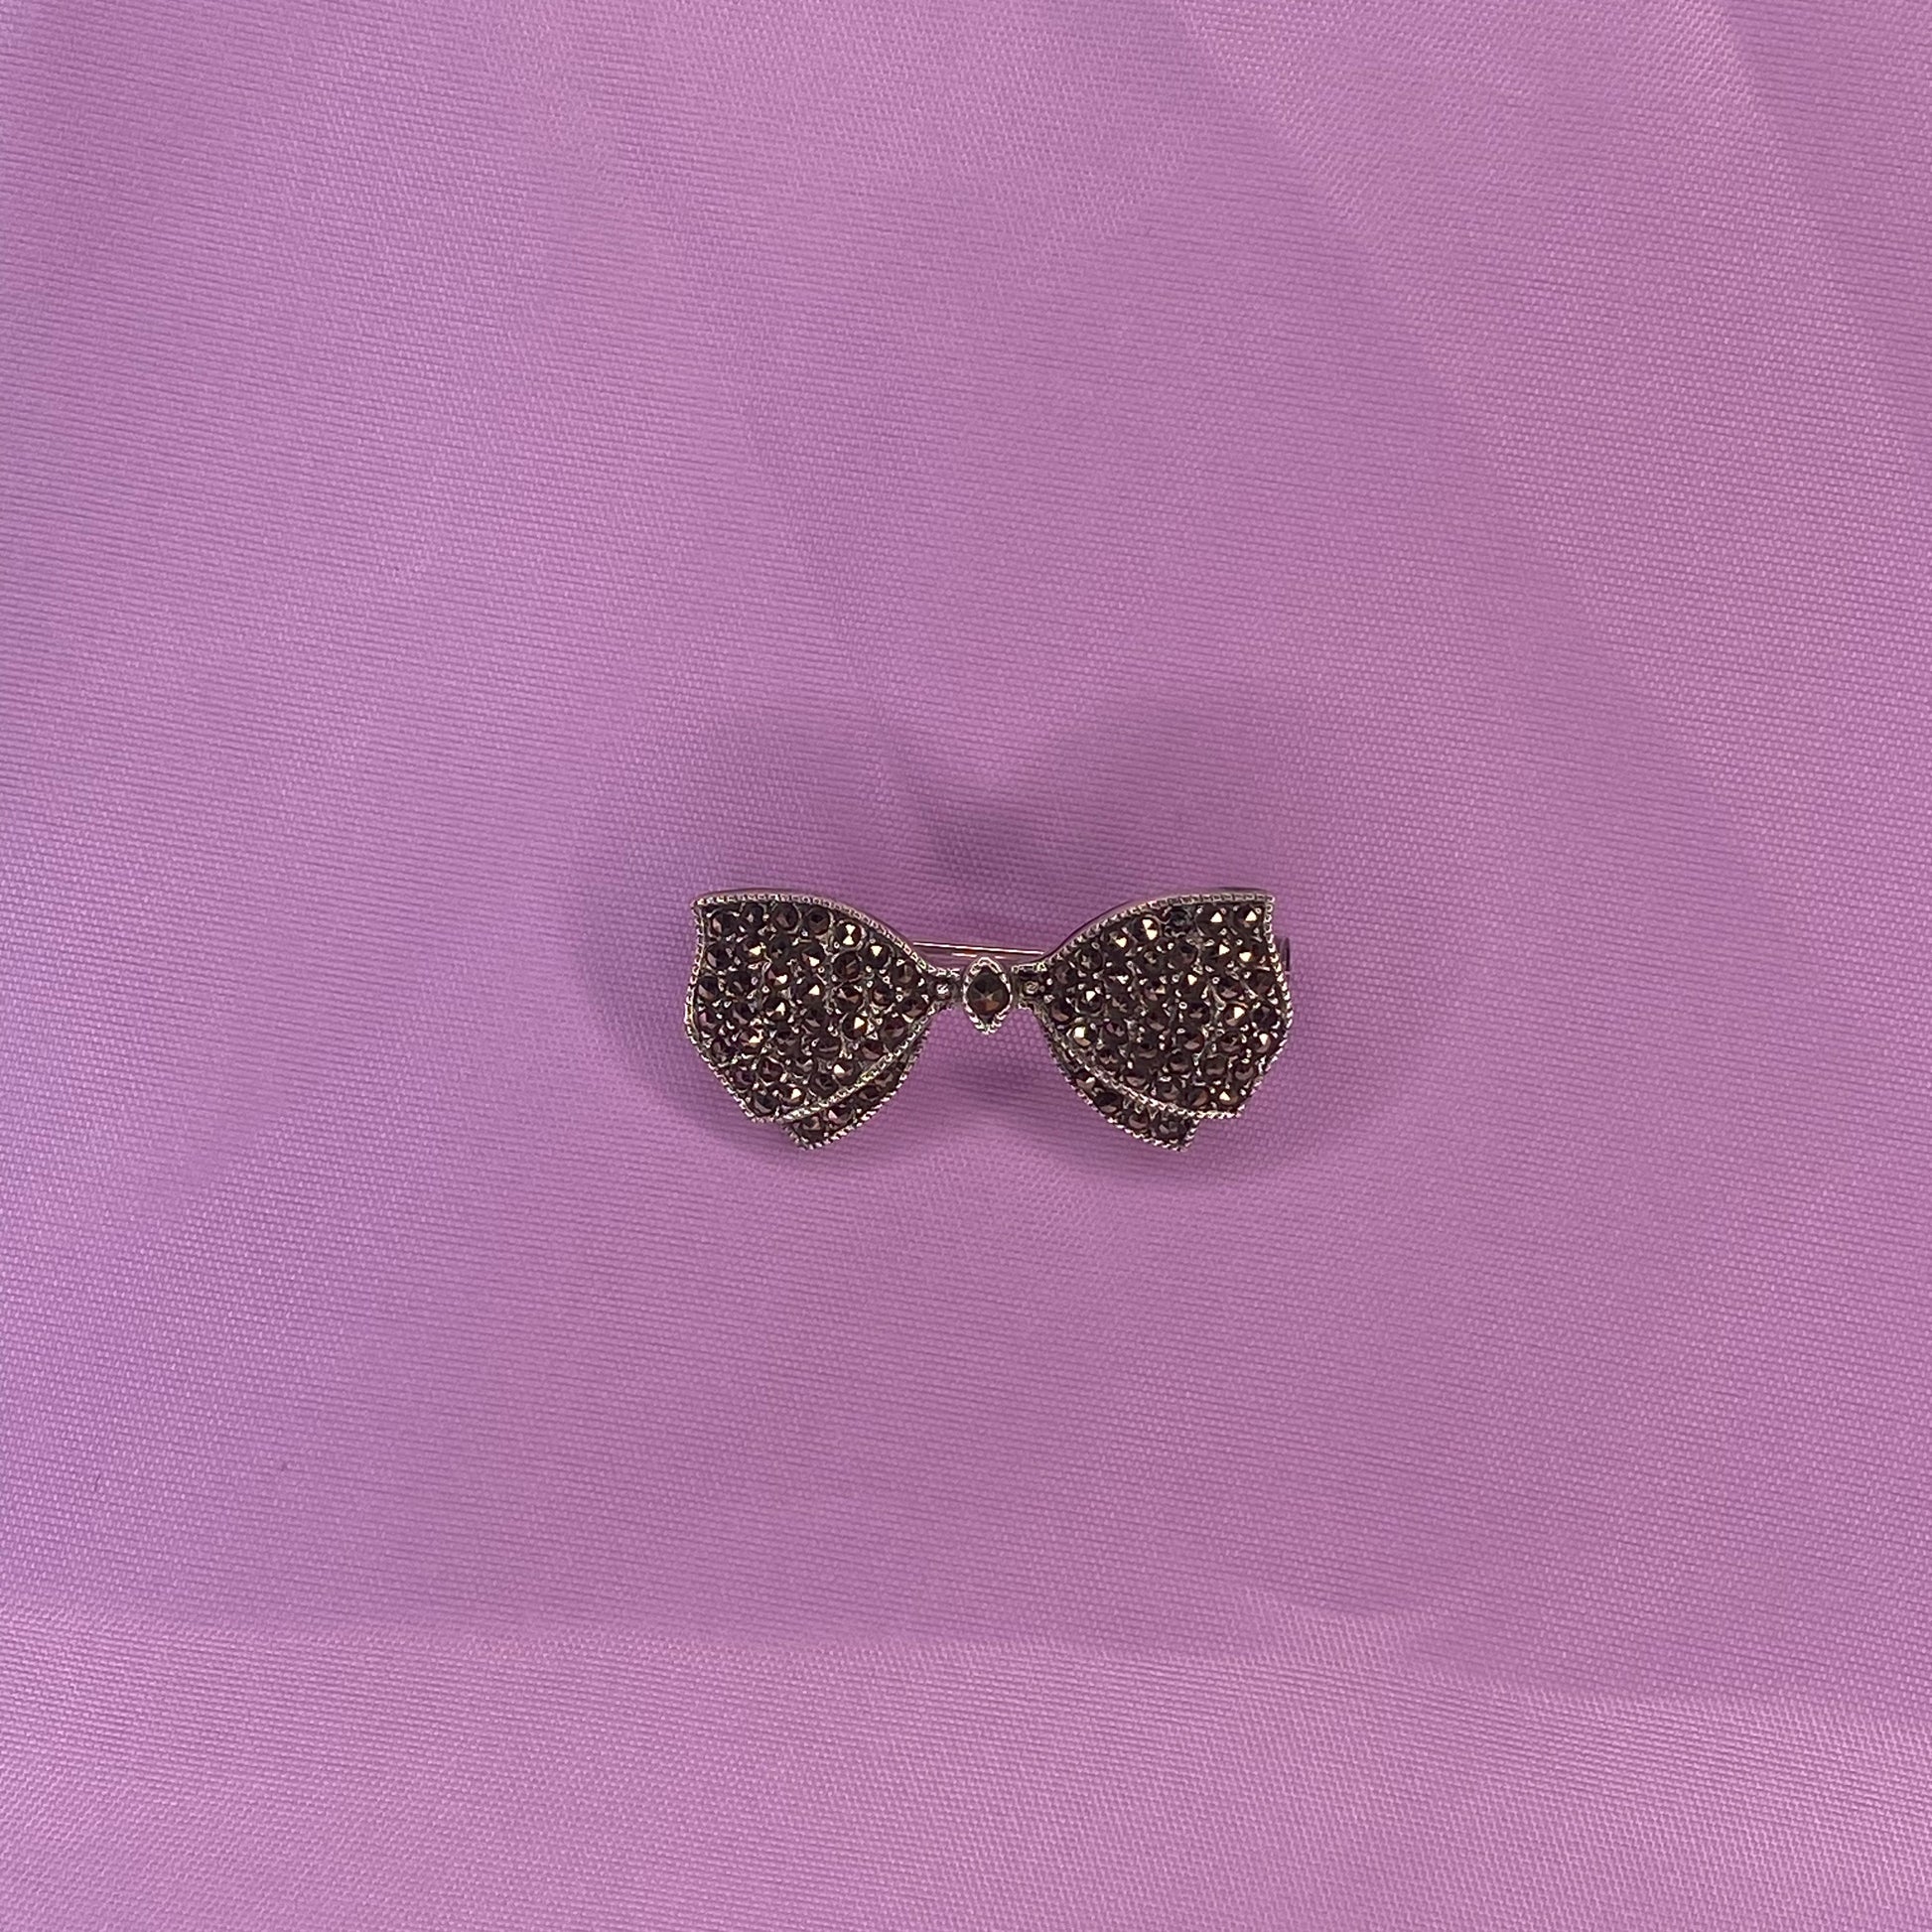 Silver Marcasite Dickie Bow Brooch - John Ross Jewellers